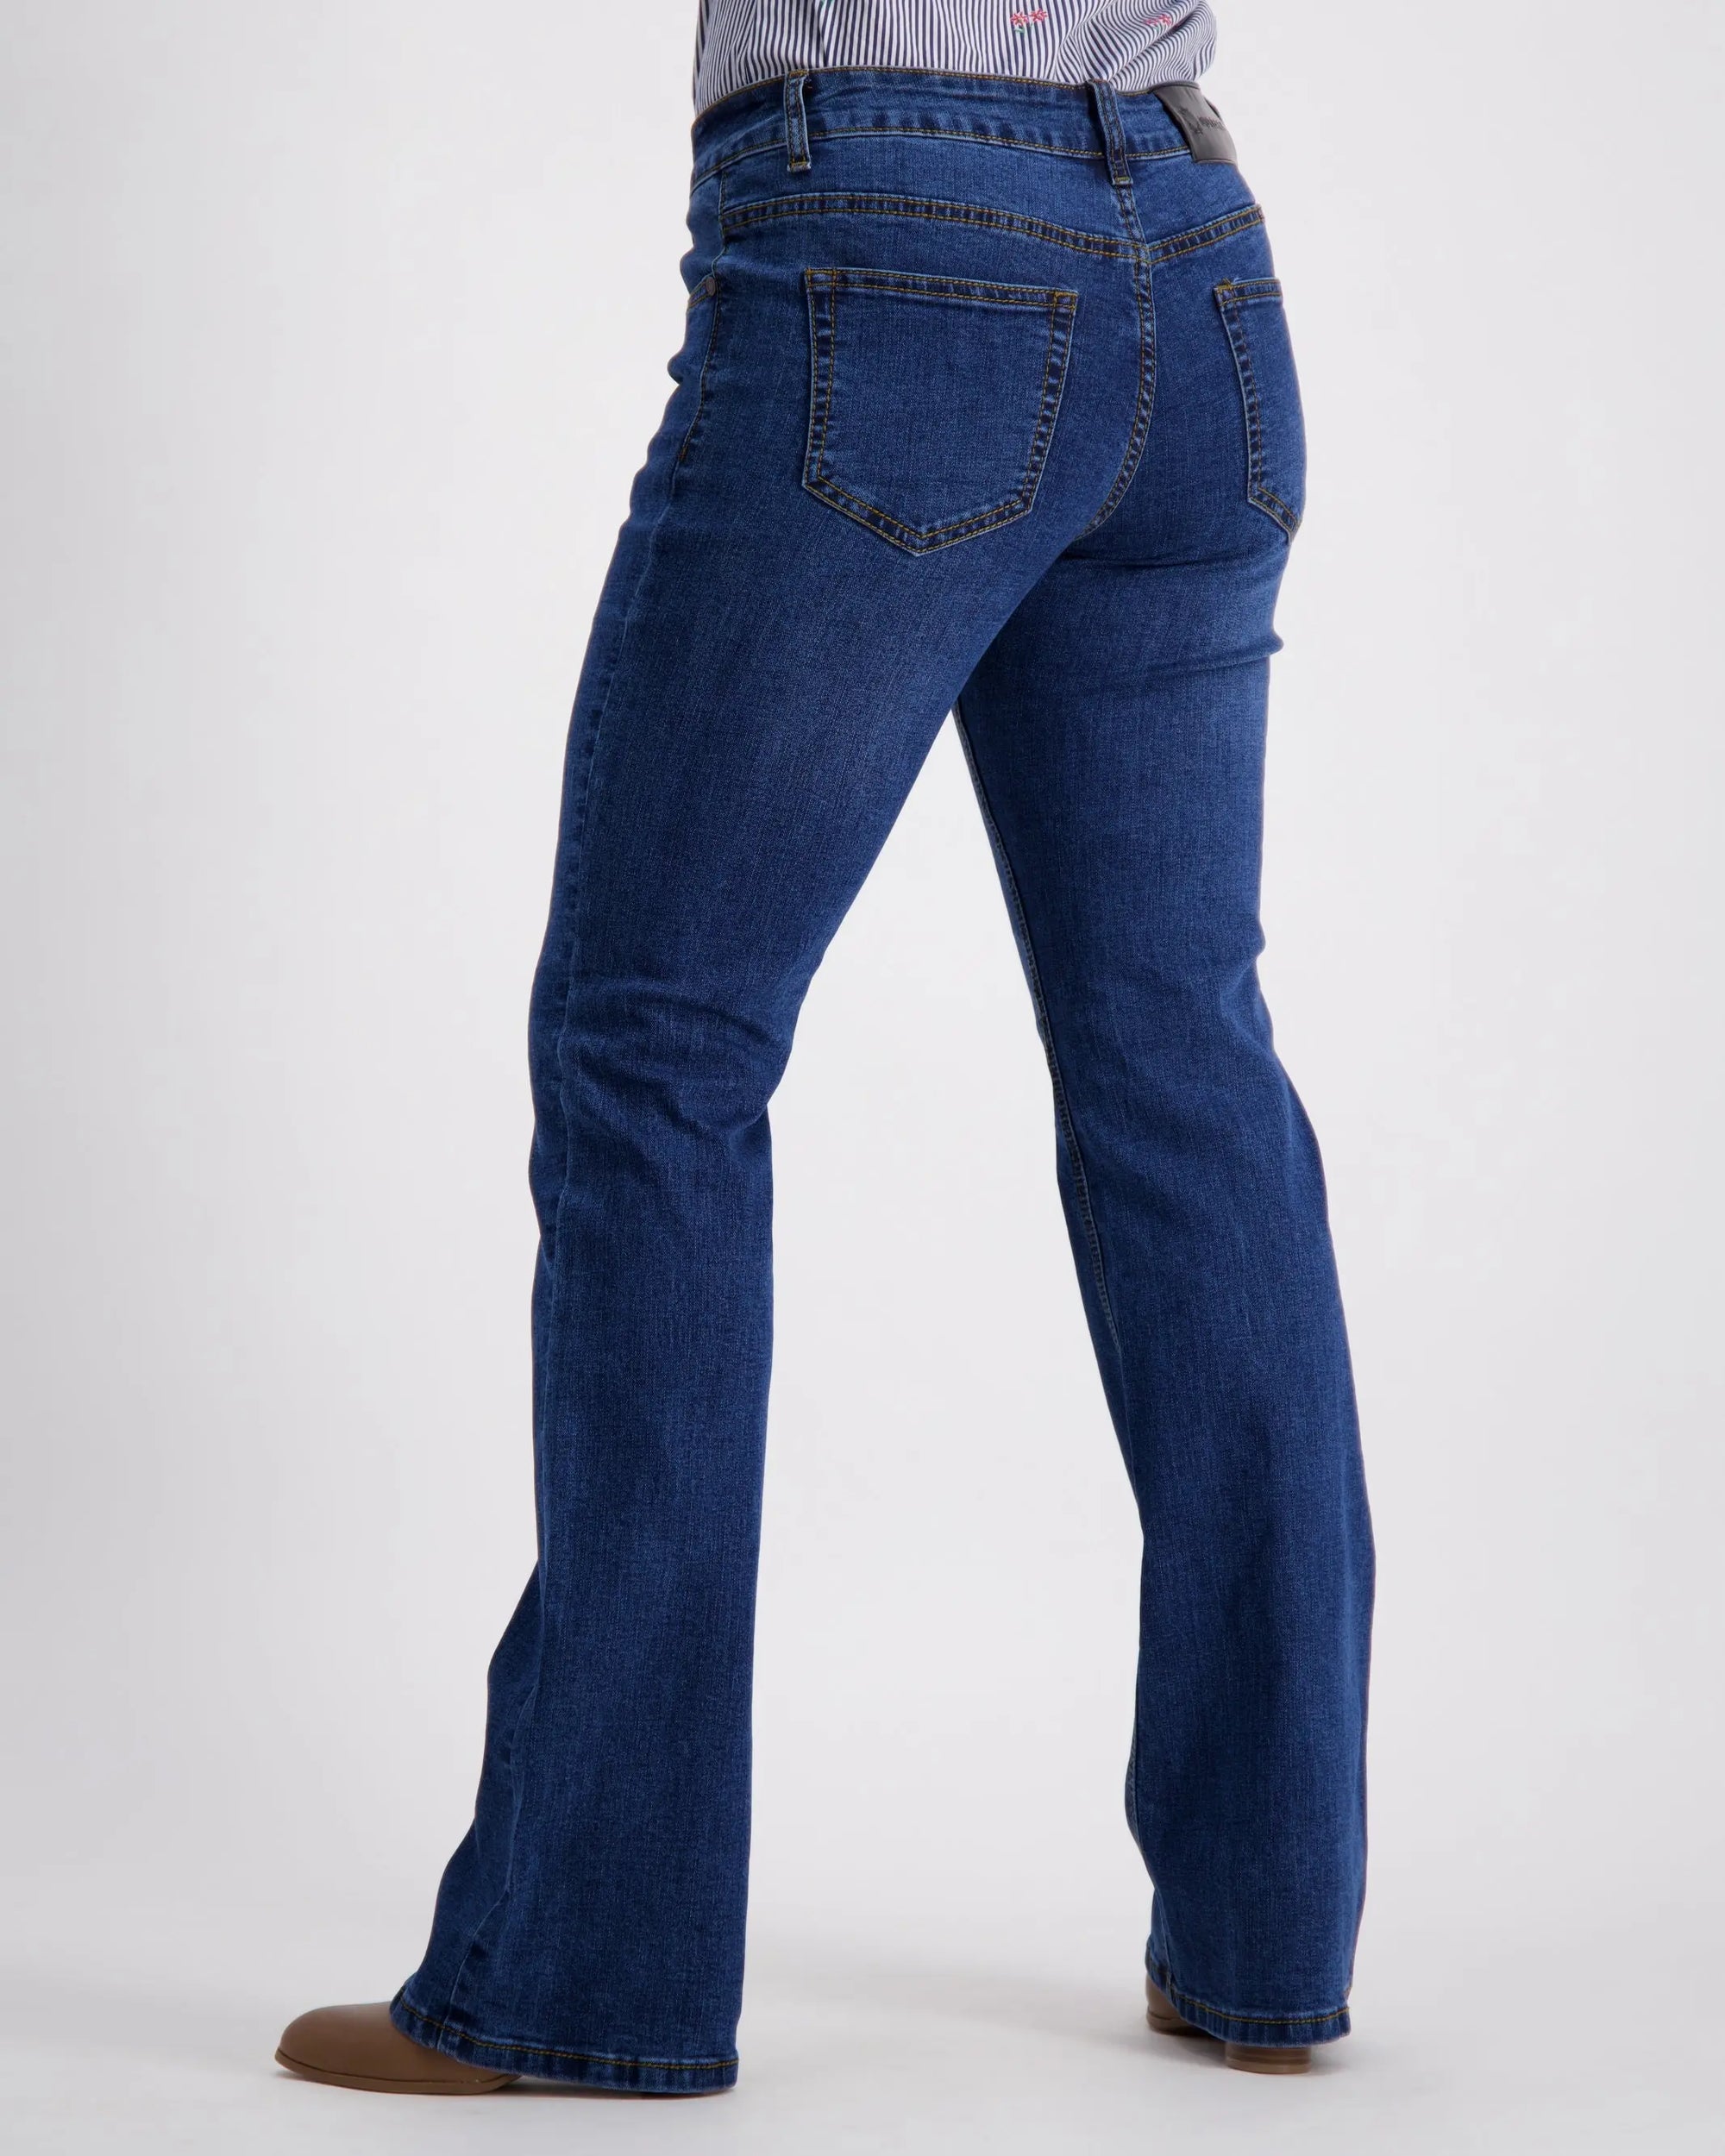 OBFilly 2.0 Blue Stonewash Womens Jeans - Boot Cut Outback Supply Co